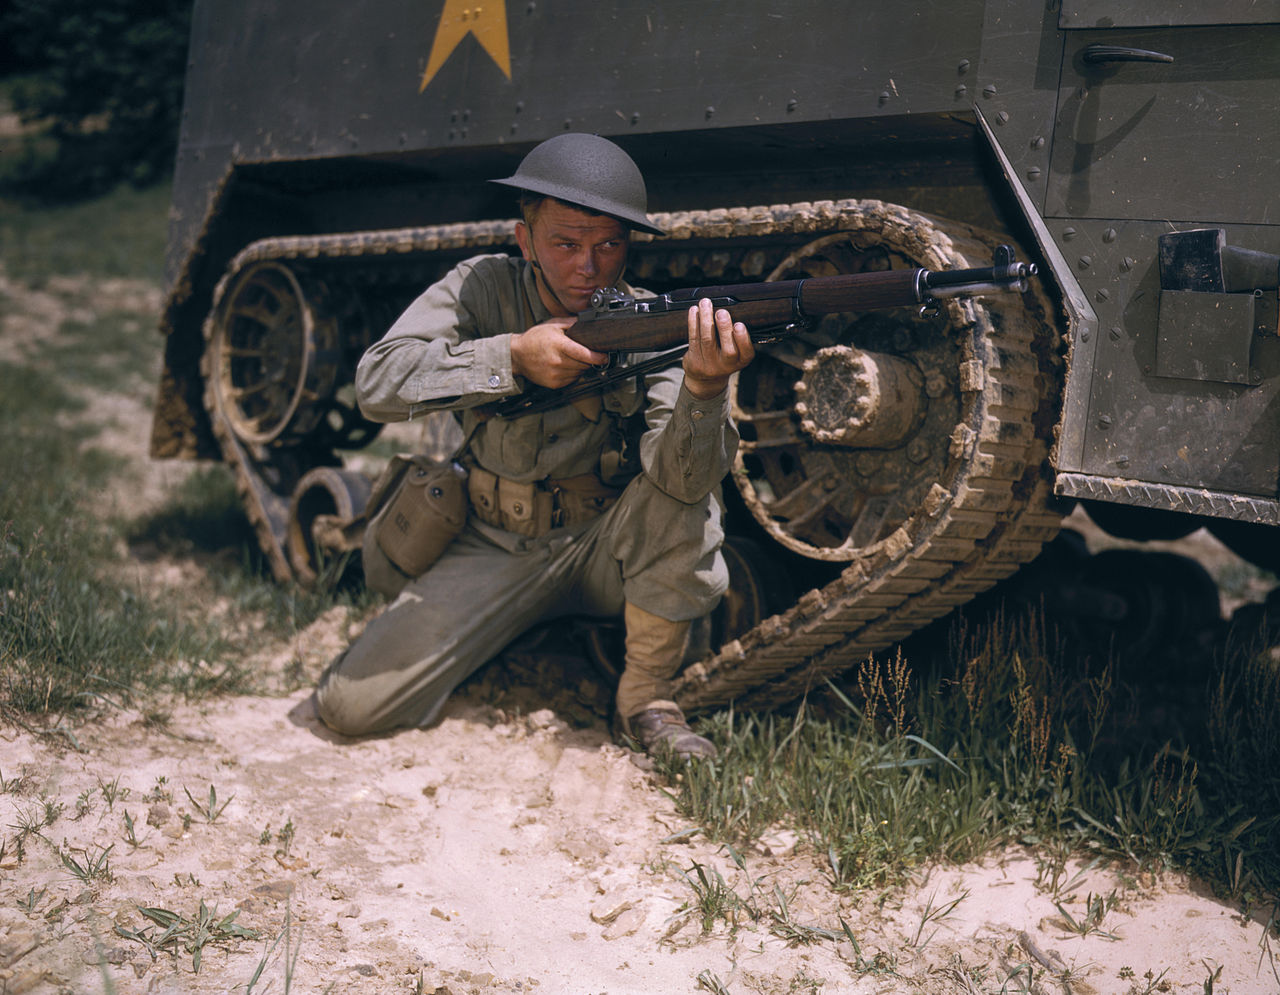 A young soldier of the armored forces holds and sights his Garand rifle like an old timer, 1942